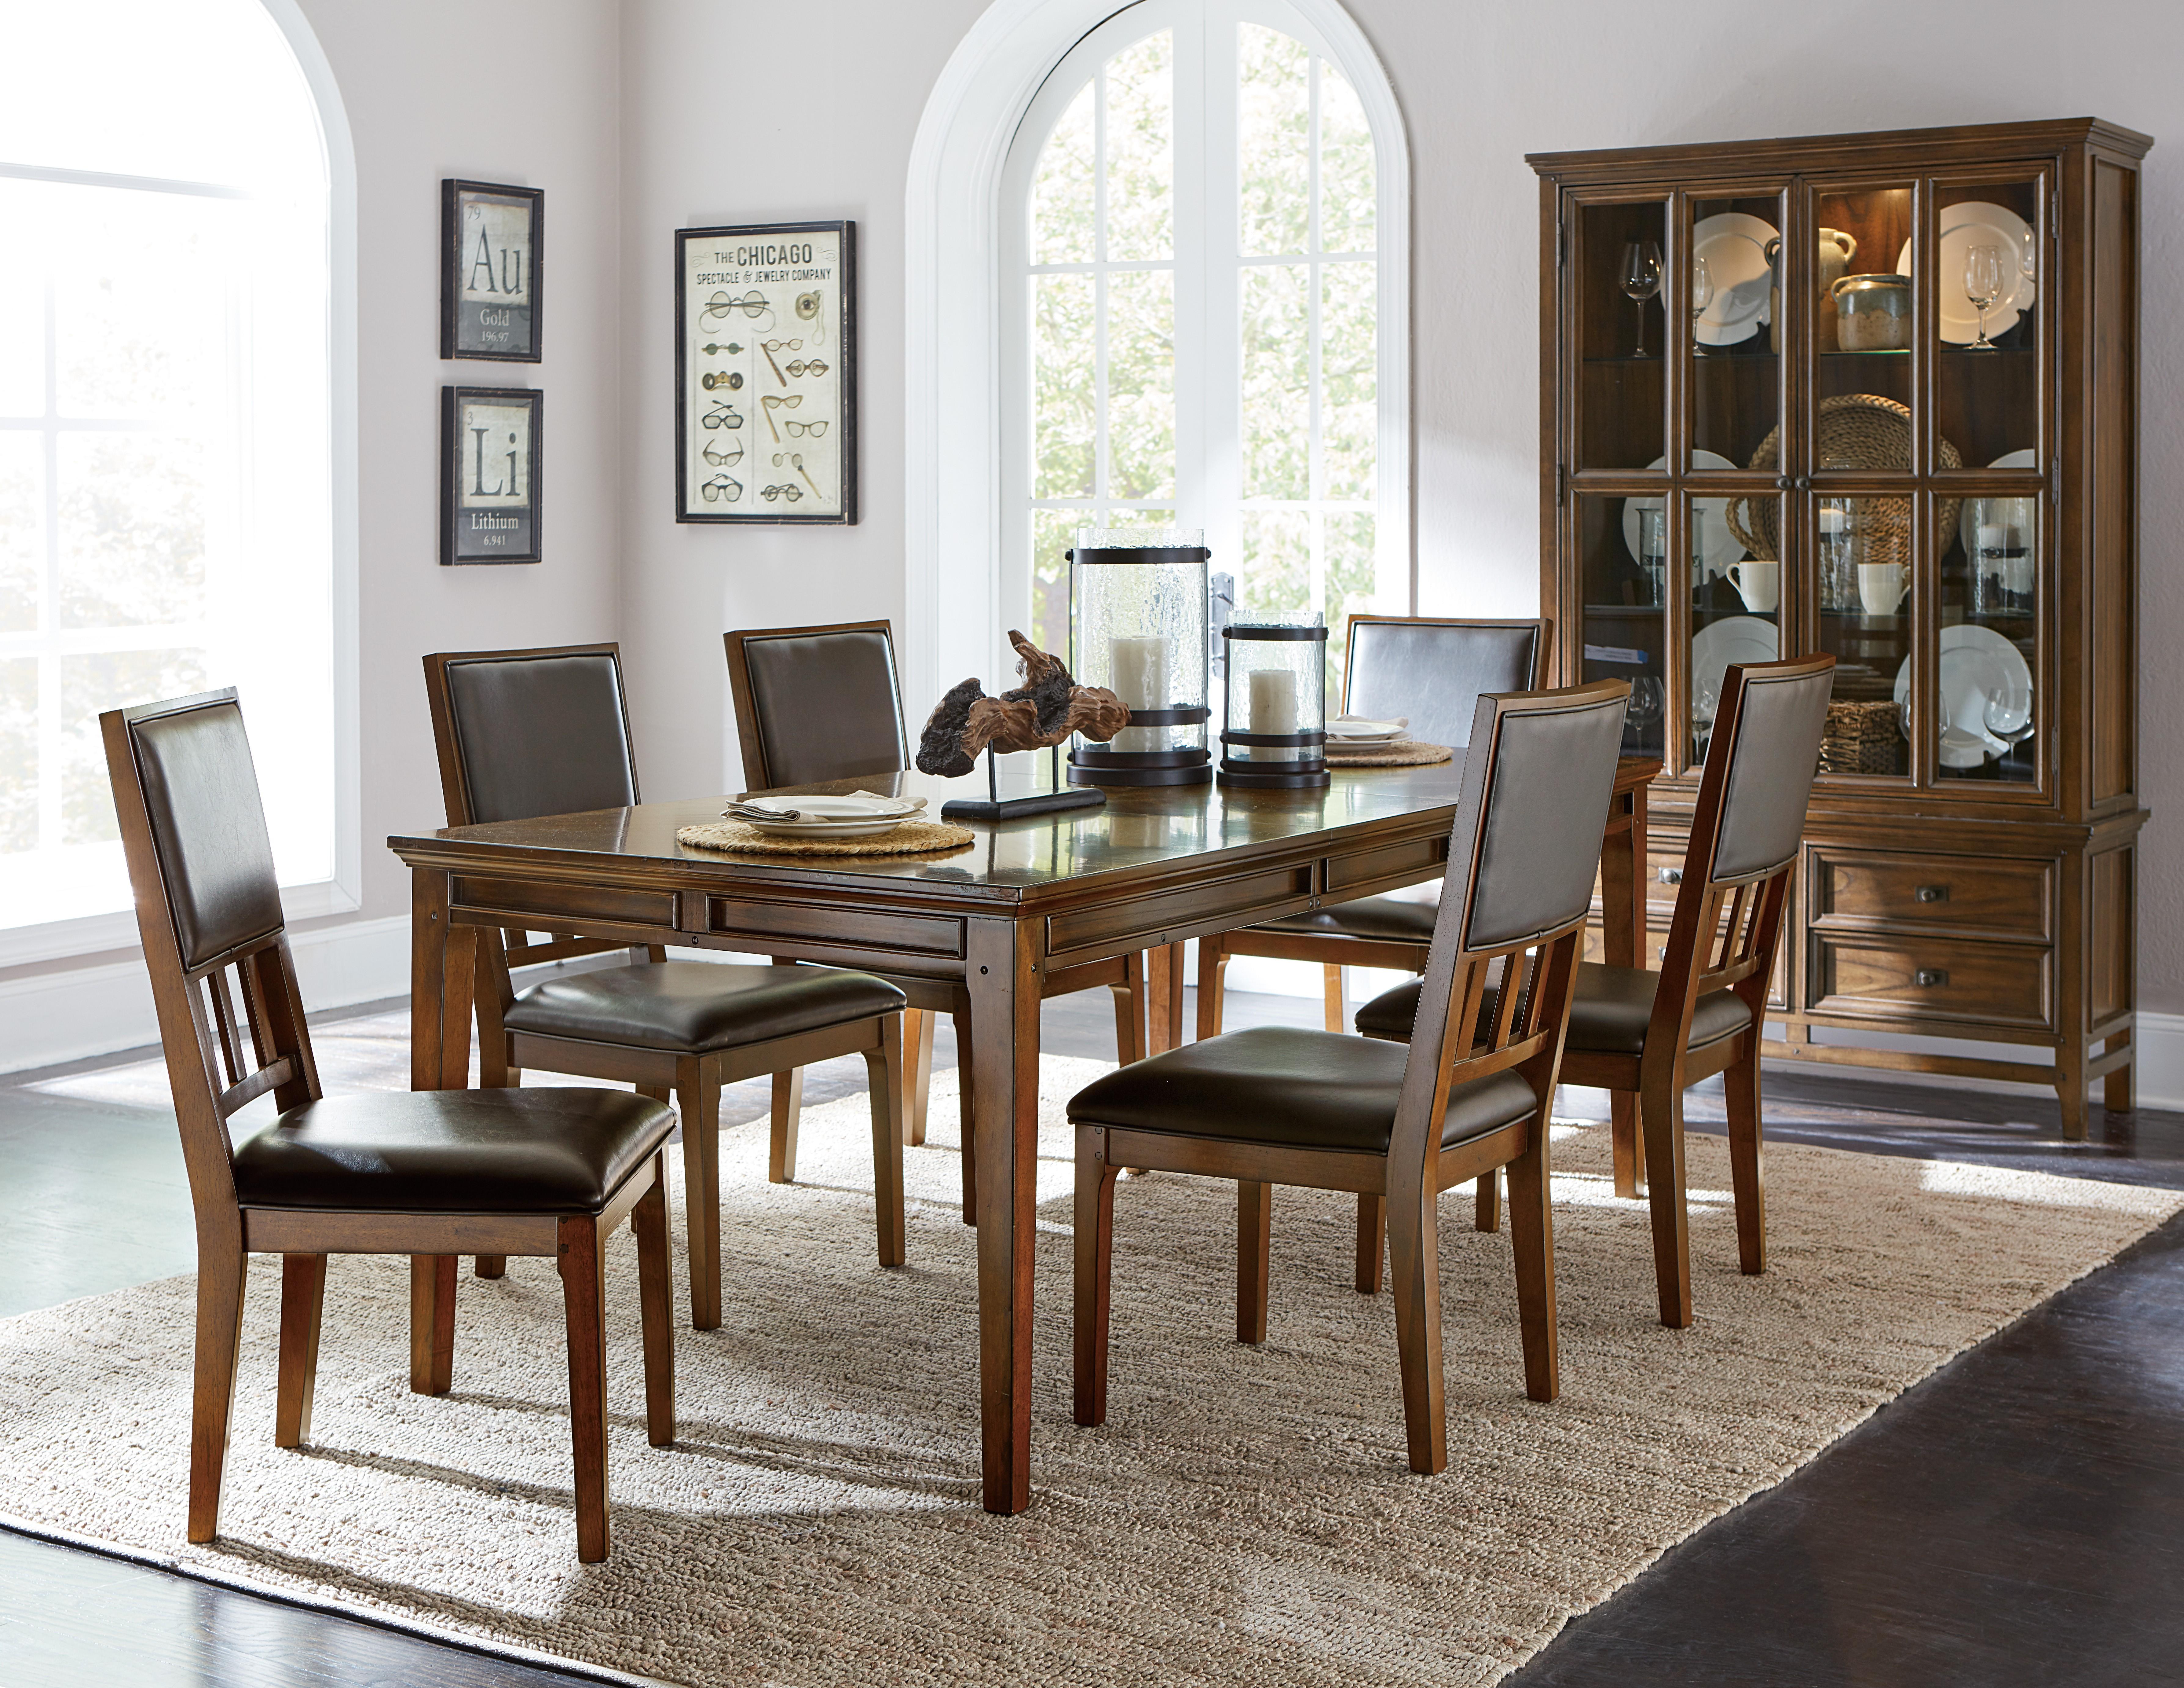 

    
Traditional Brown Cherry Wood Dining Room Set 8pcs Homelegance 1649-82* Frazier Park
